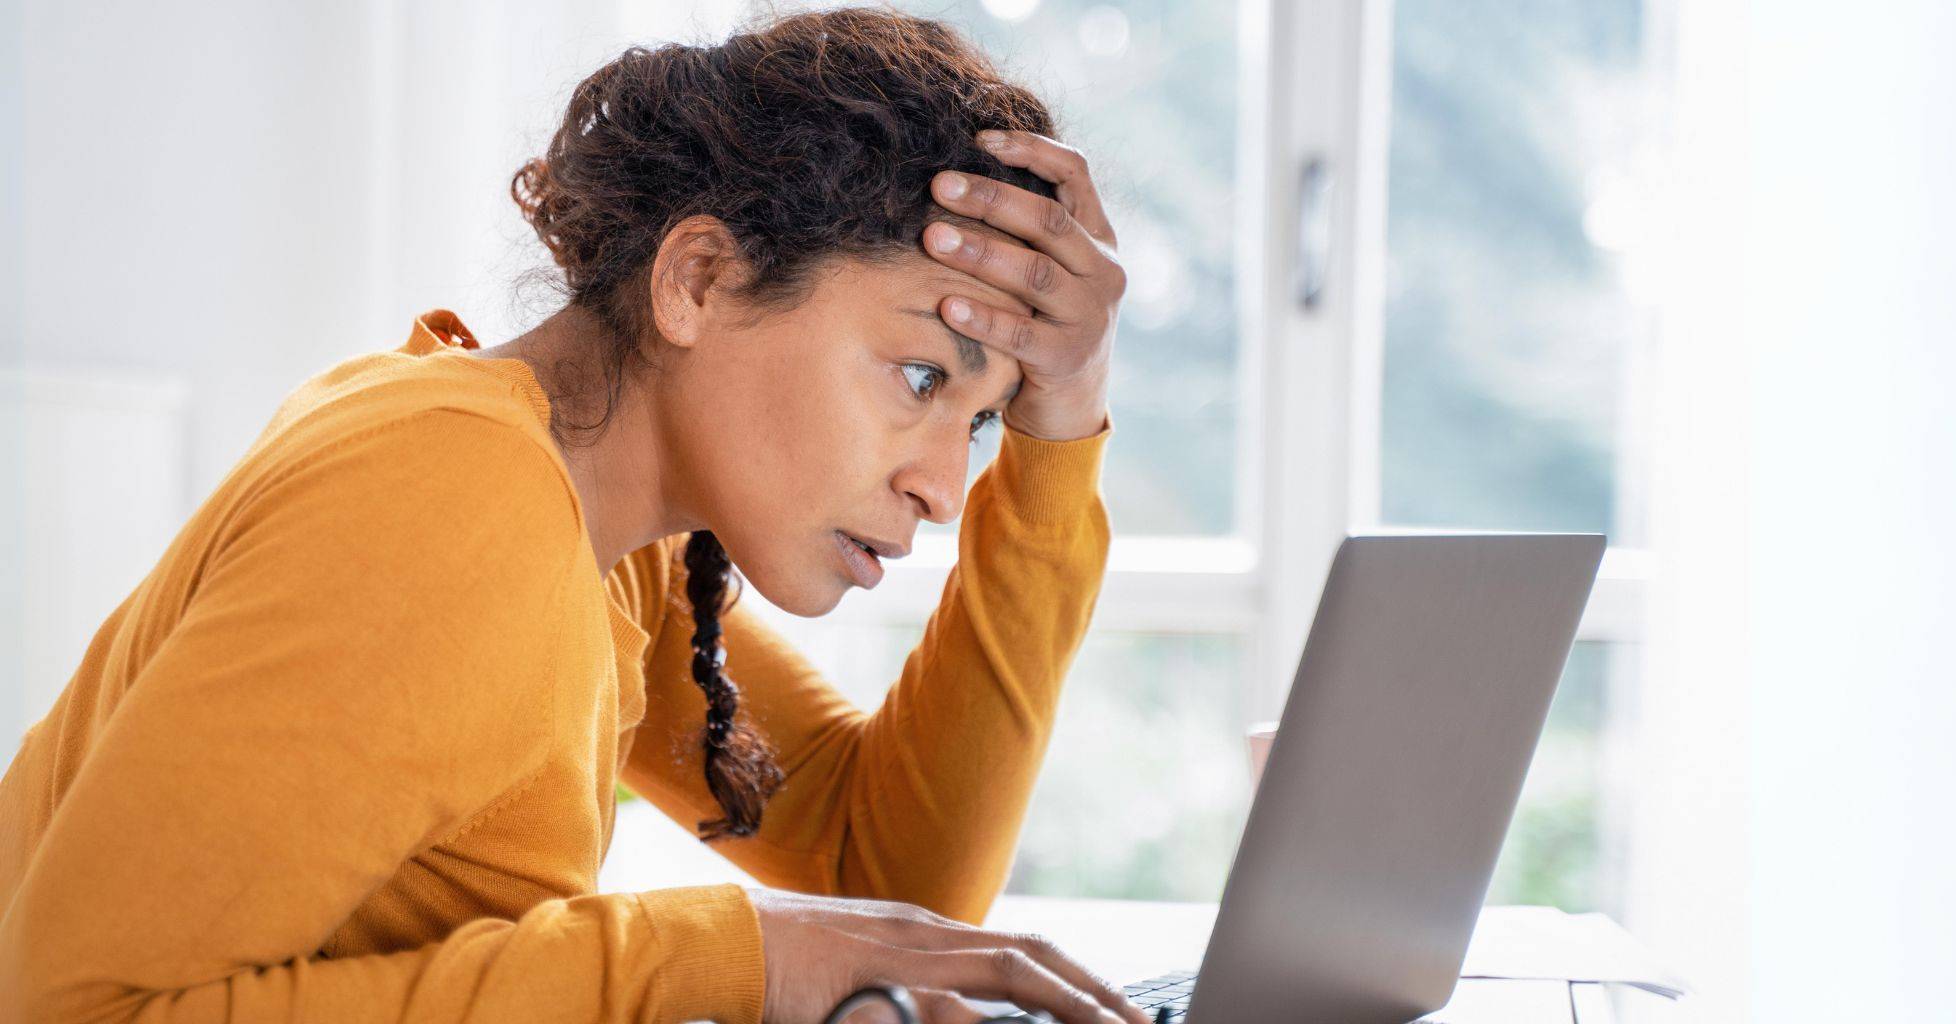 women sitting leaning looking atlaptop with hand on her forehead in disbelief